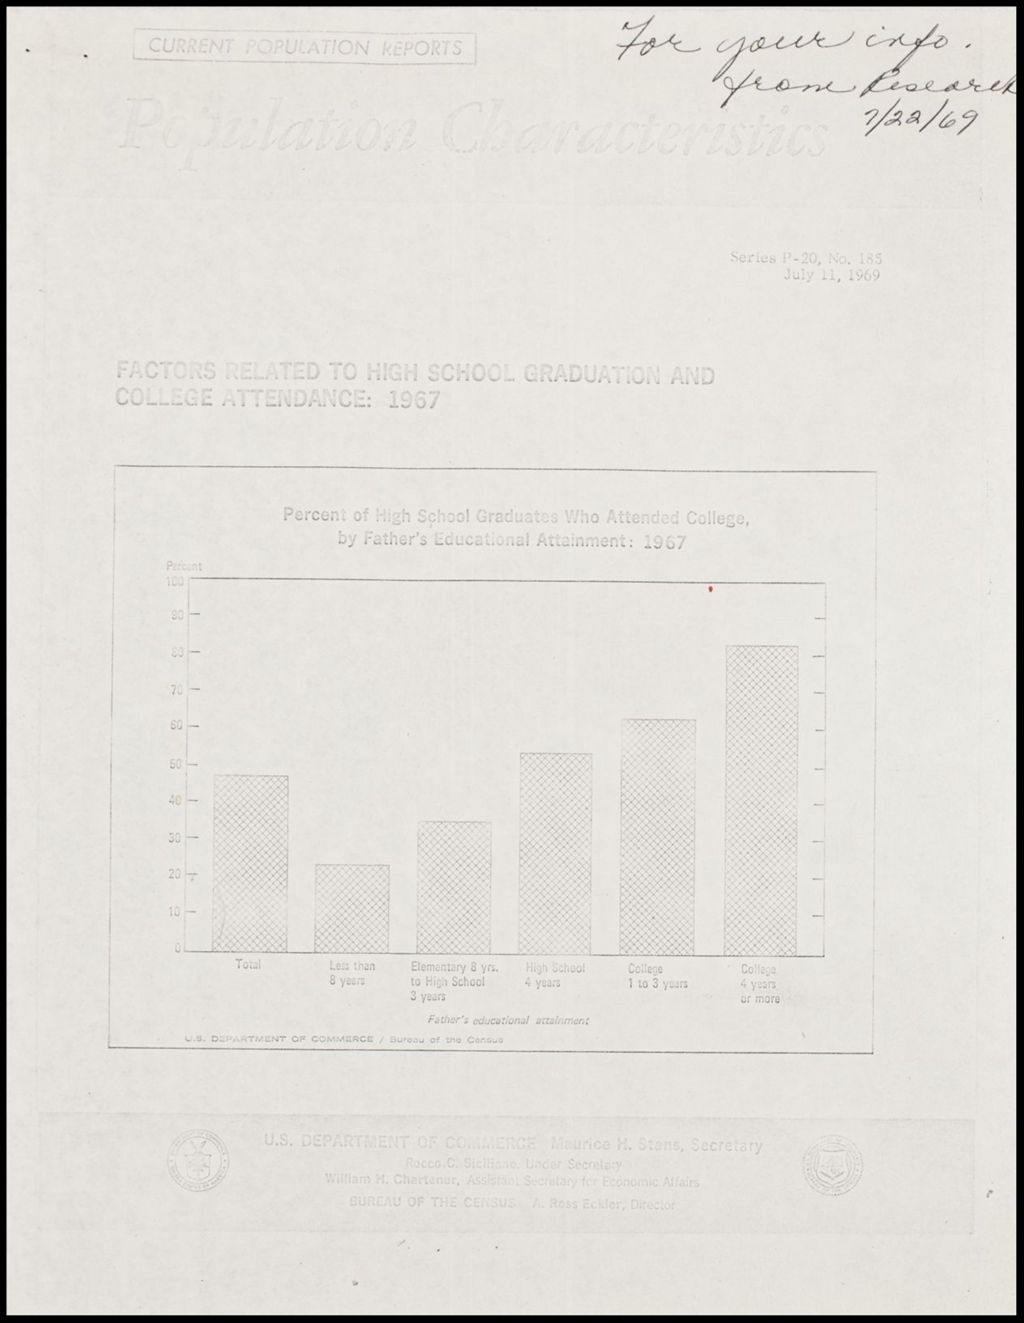 Research and Planning Education, 1969 (Folder IV-1099)